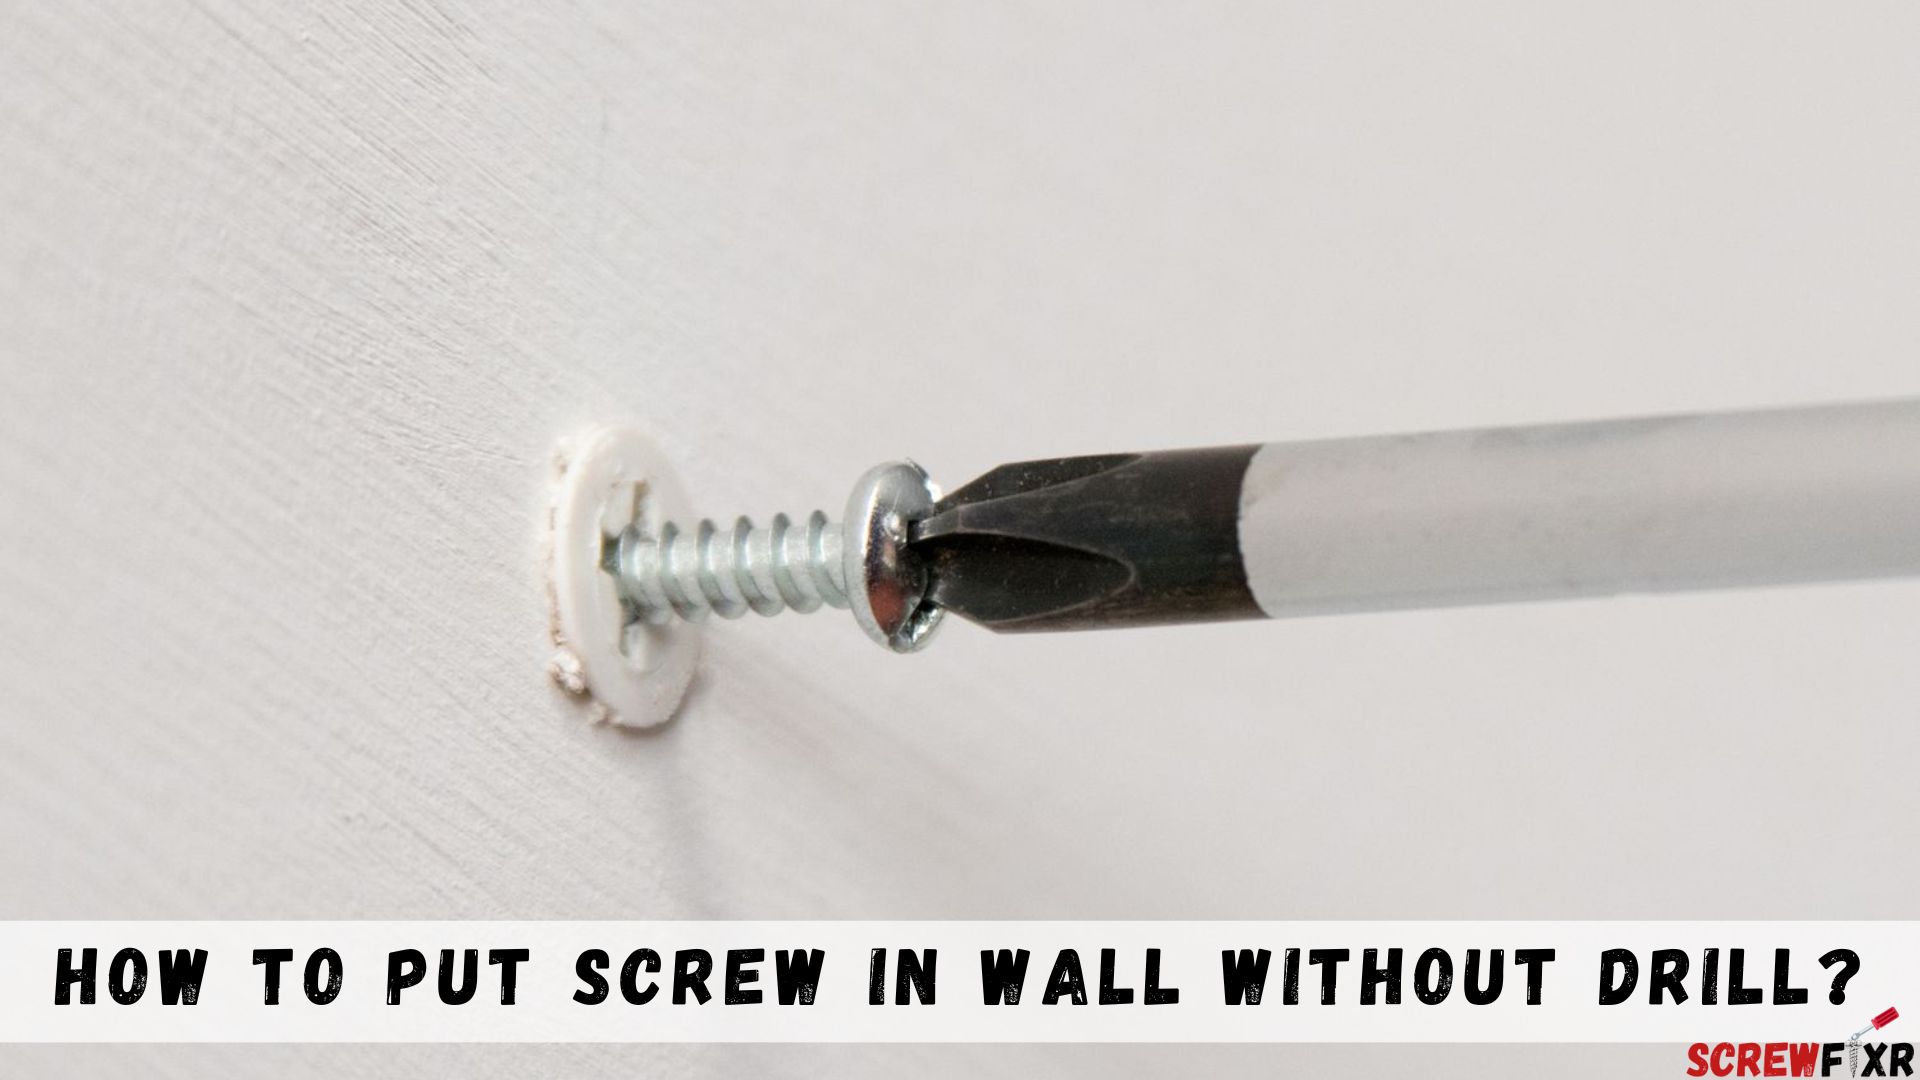 How To Put Screw In Wall Without Drill